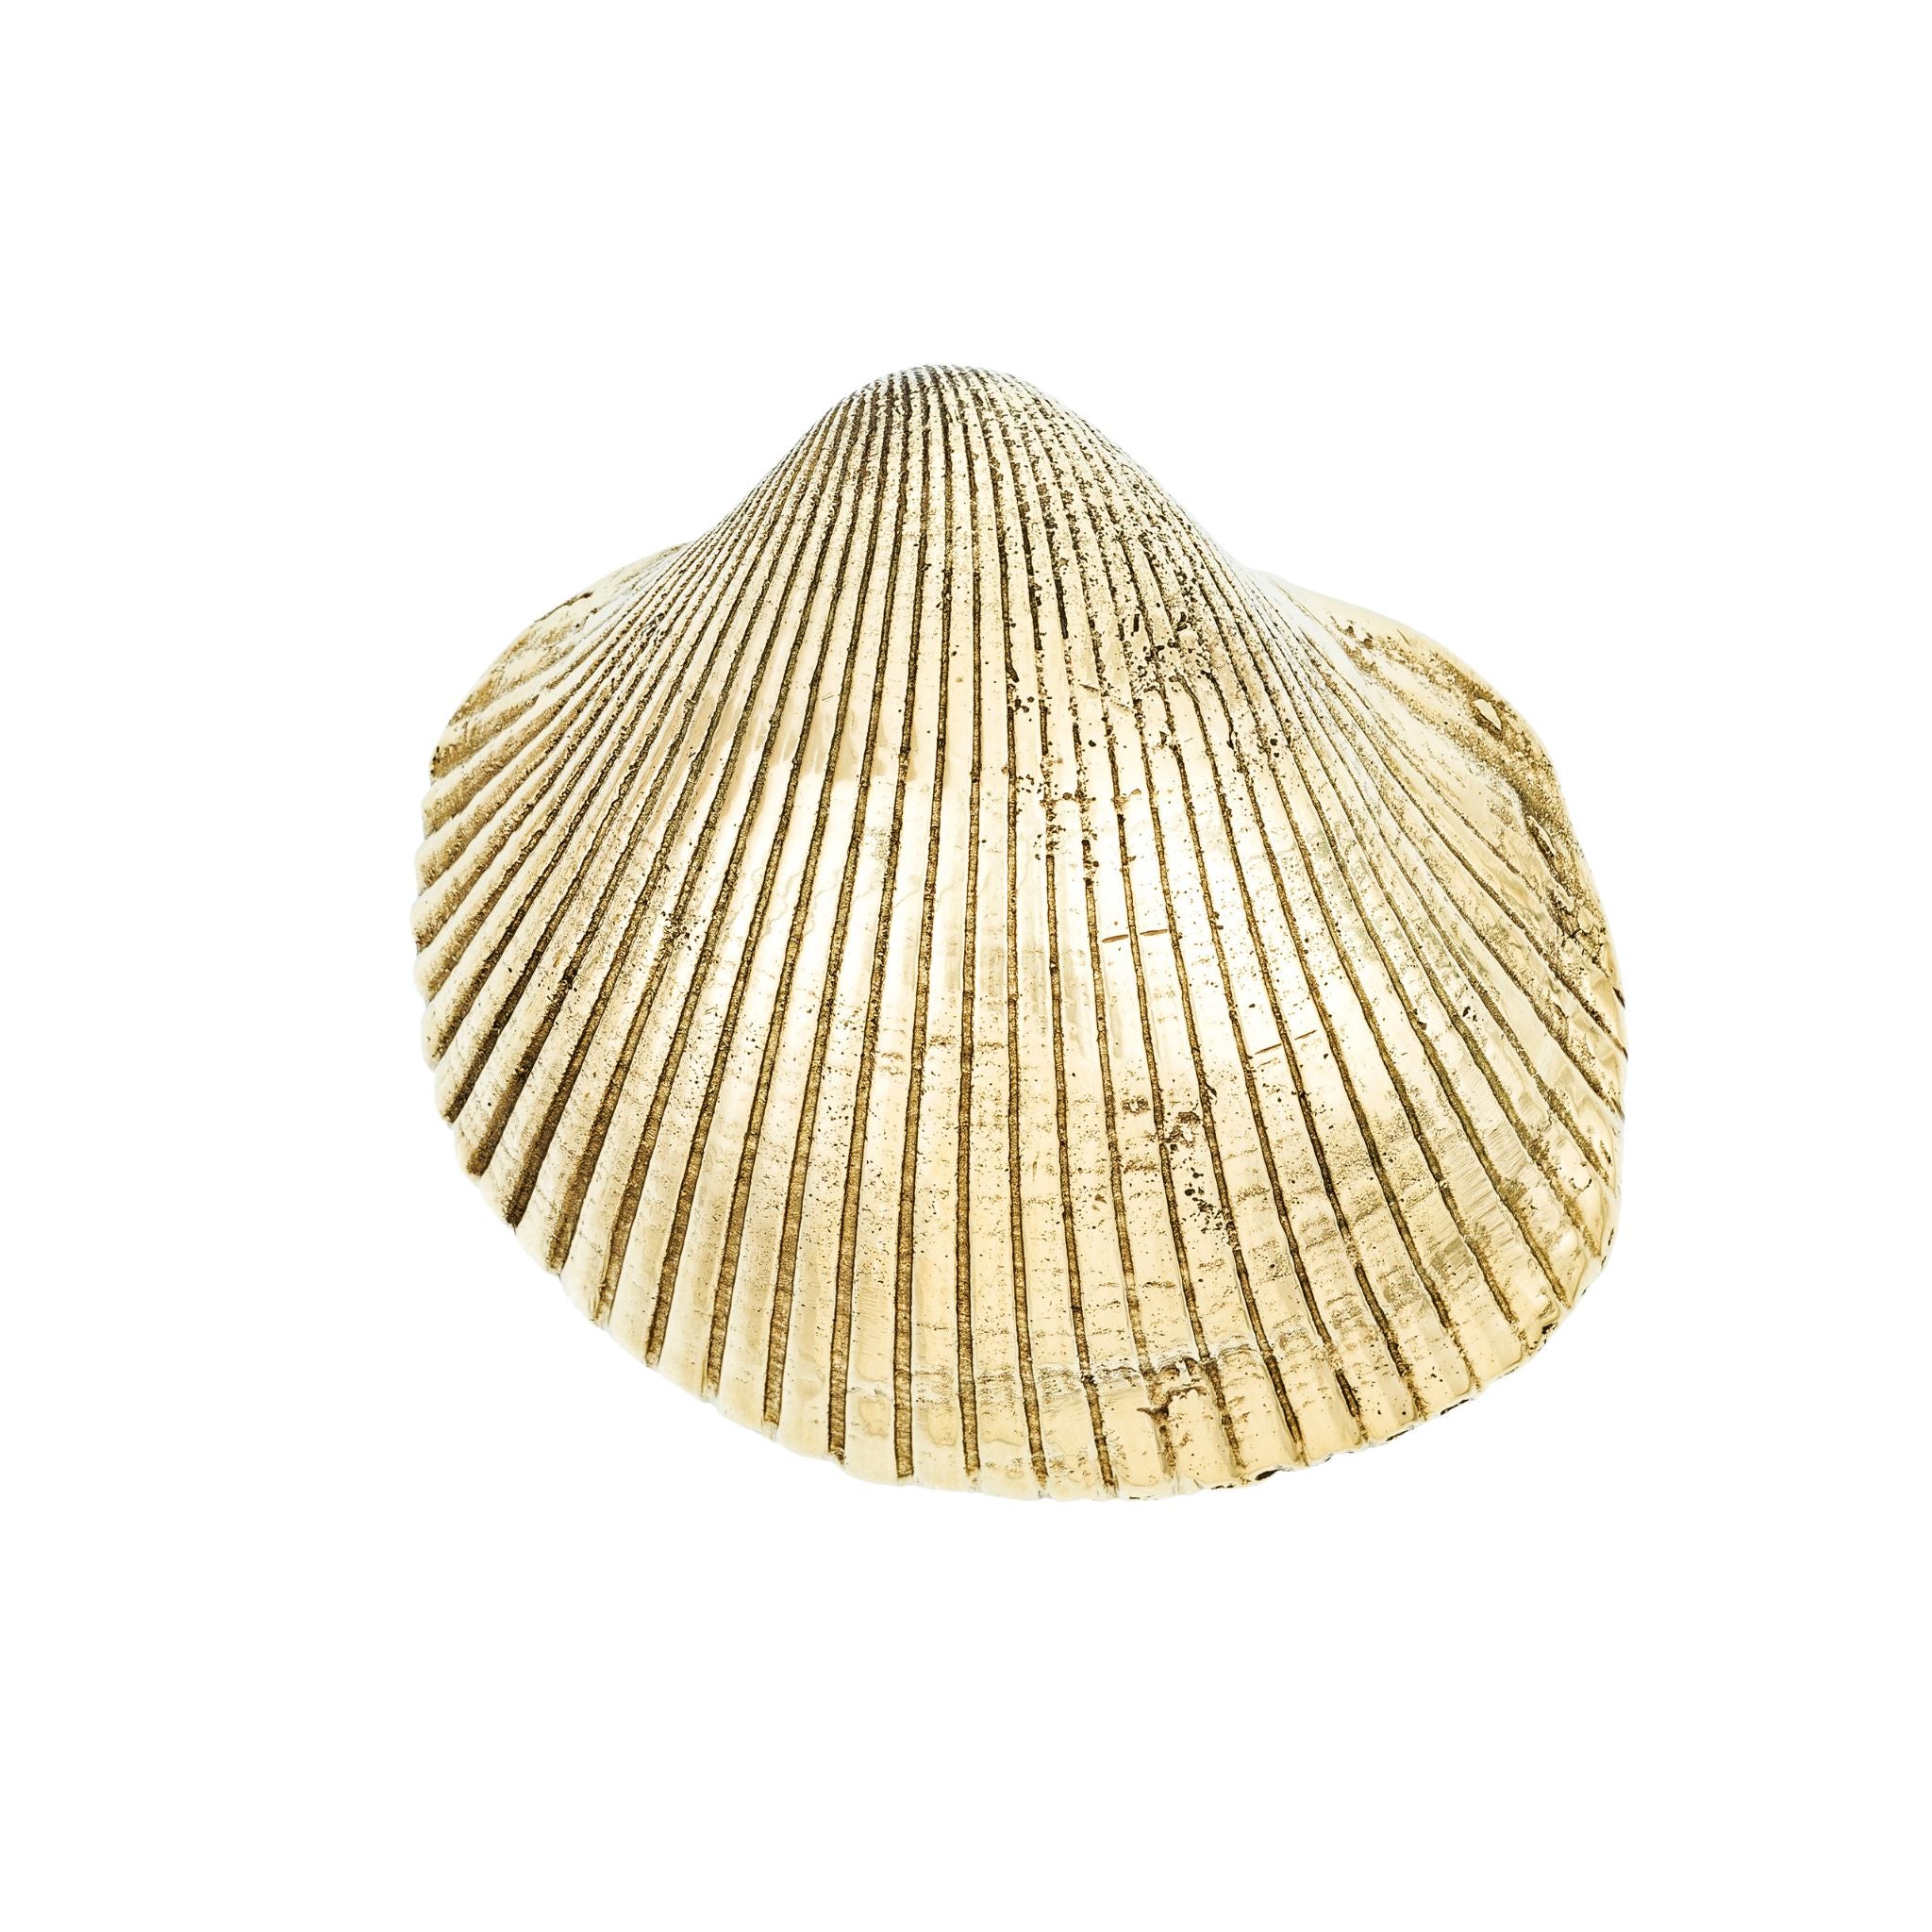 Brass cabinet knob shaped like a seashell, adding a touch of coastal elegance to furniture and cabinets.